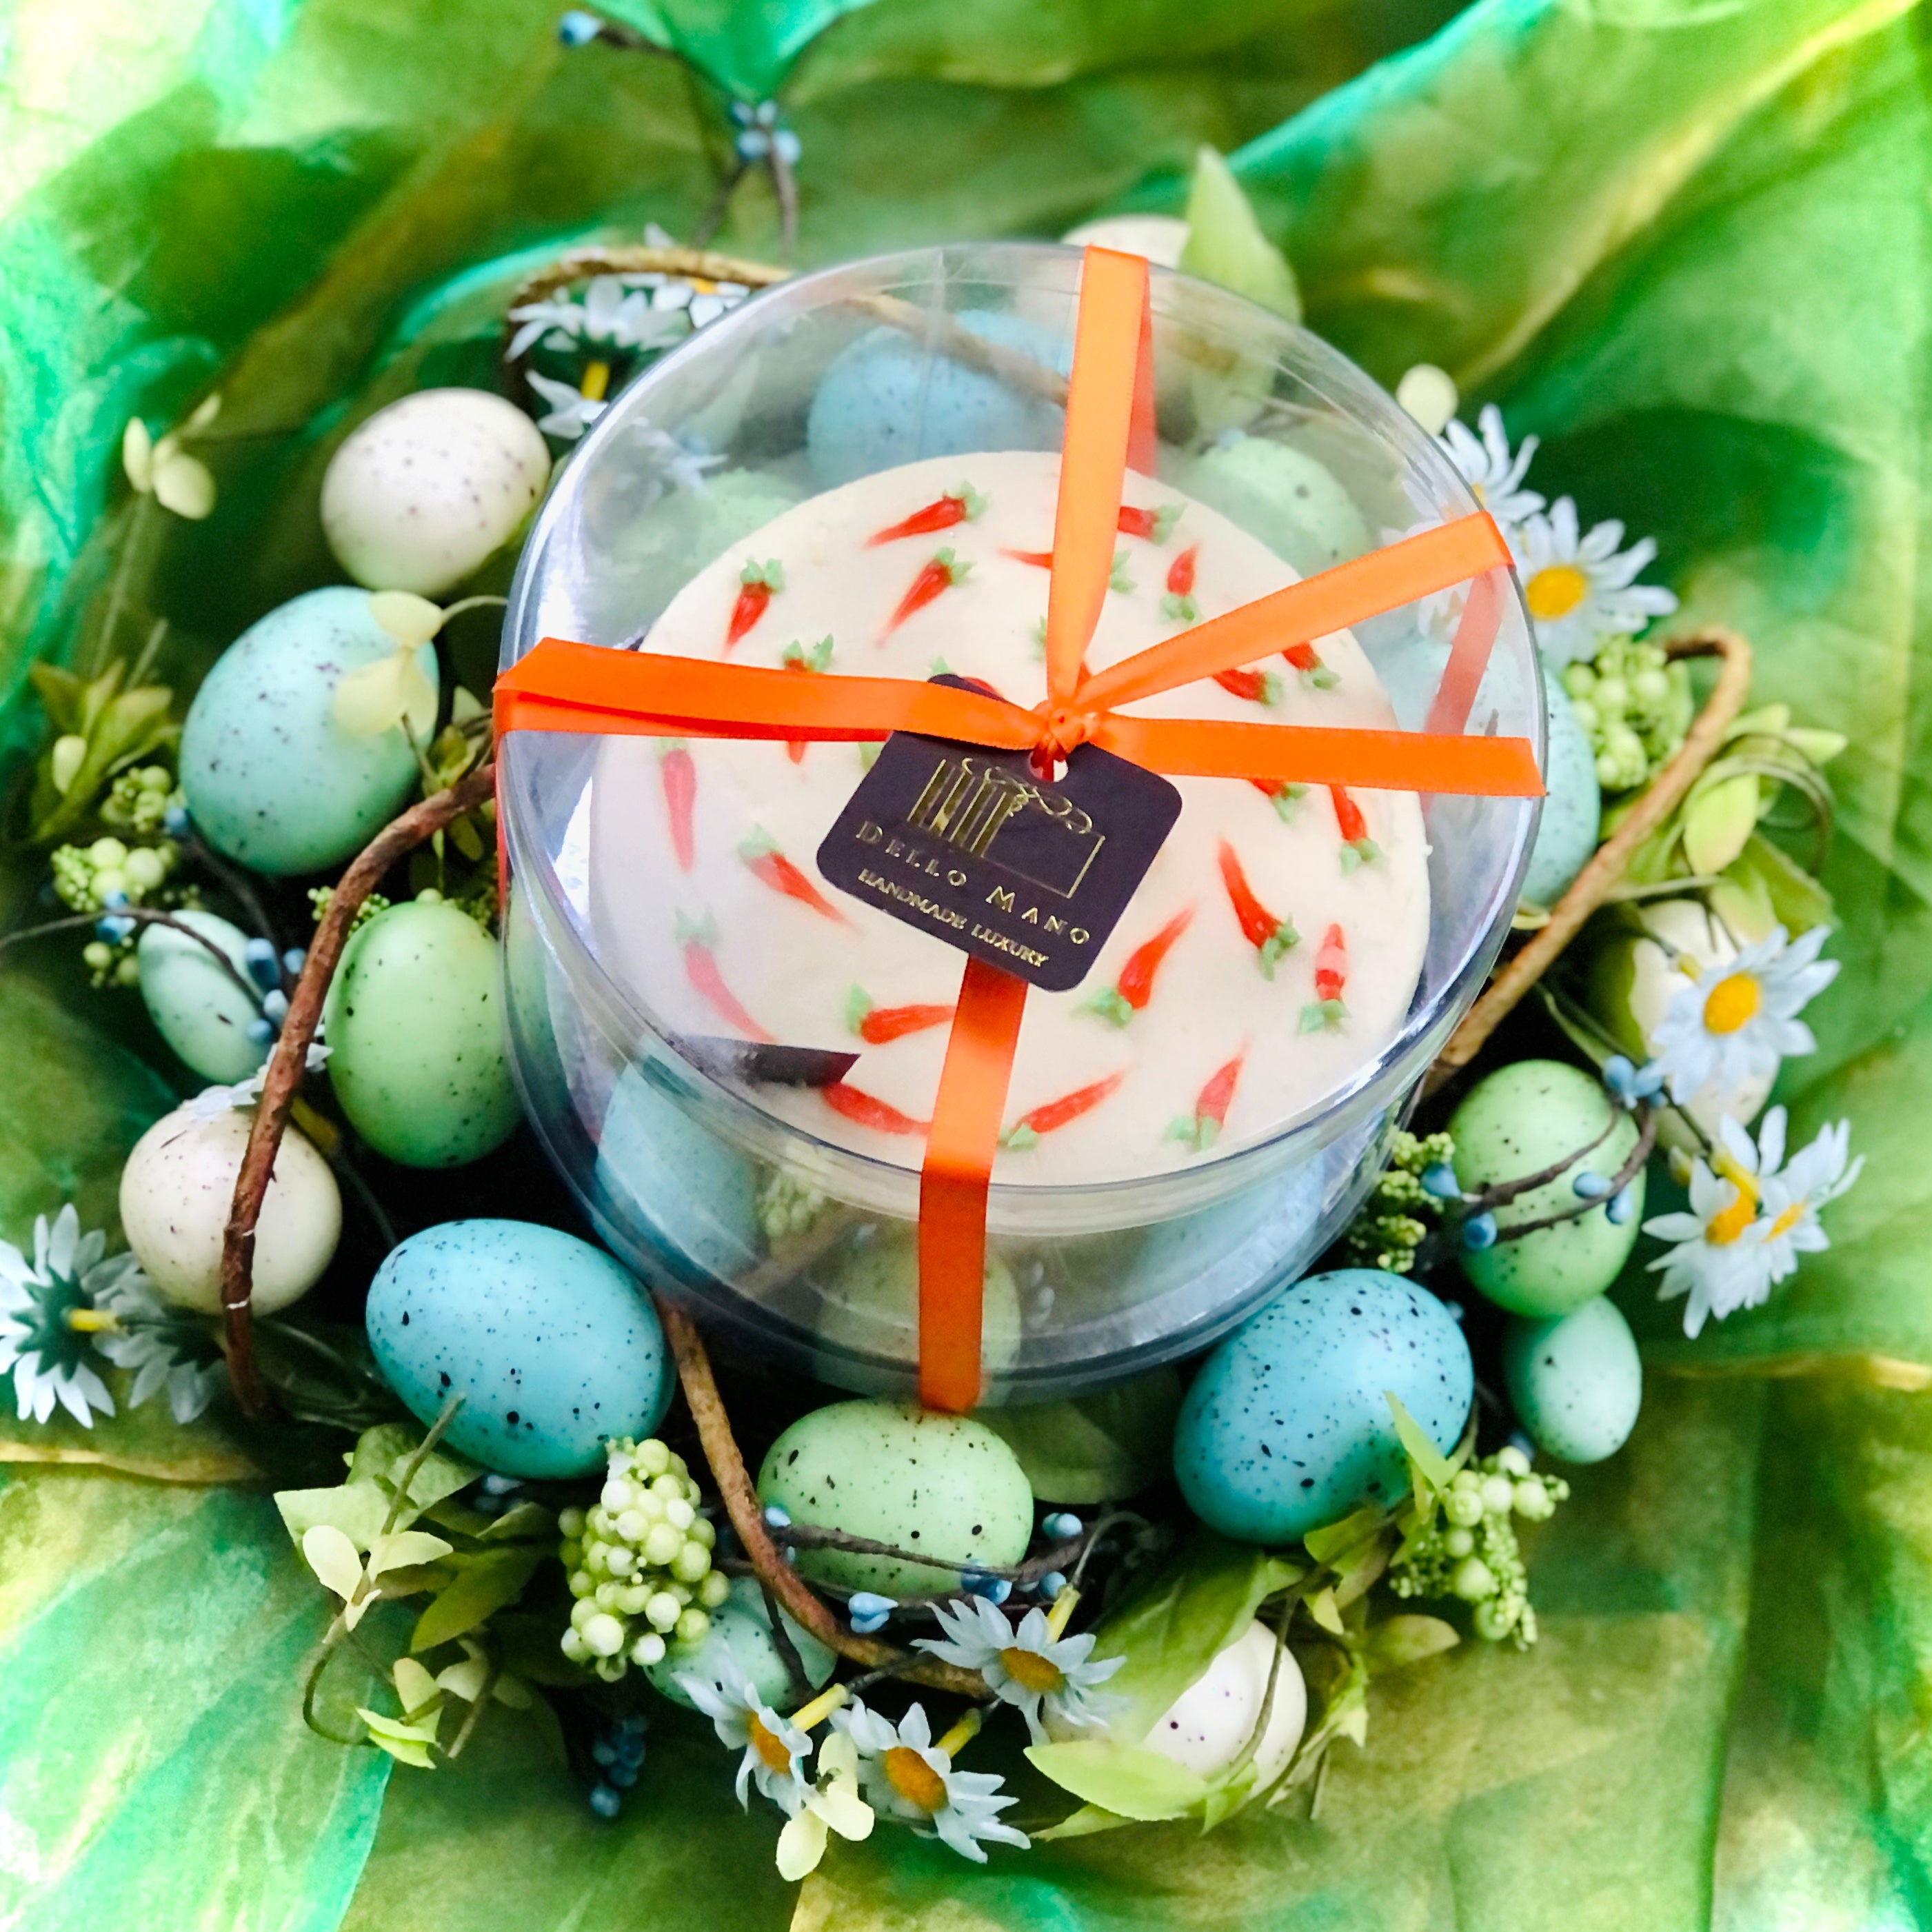 Top view of an Easter Cake gift box with orange ribbon sitting in an Easter wreath